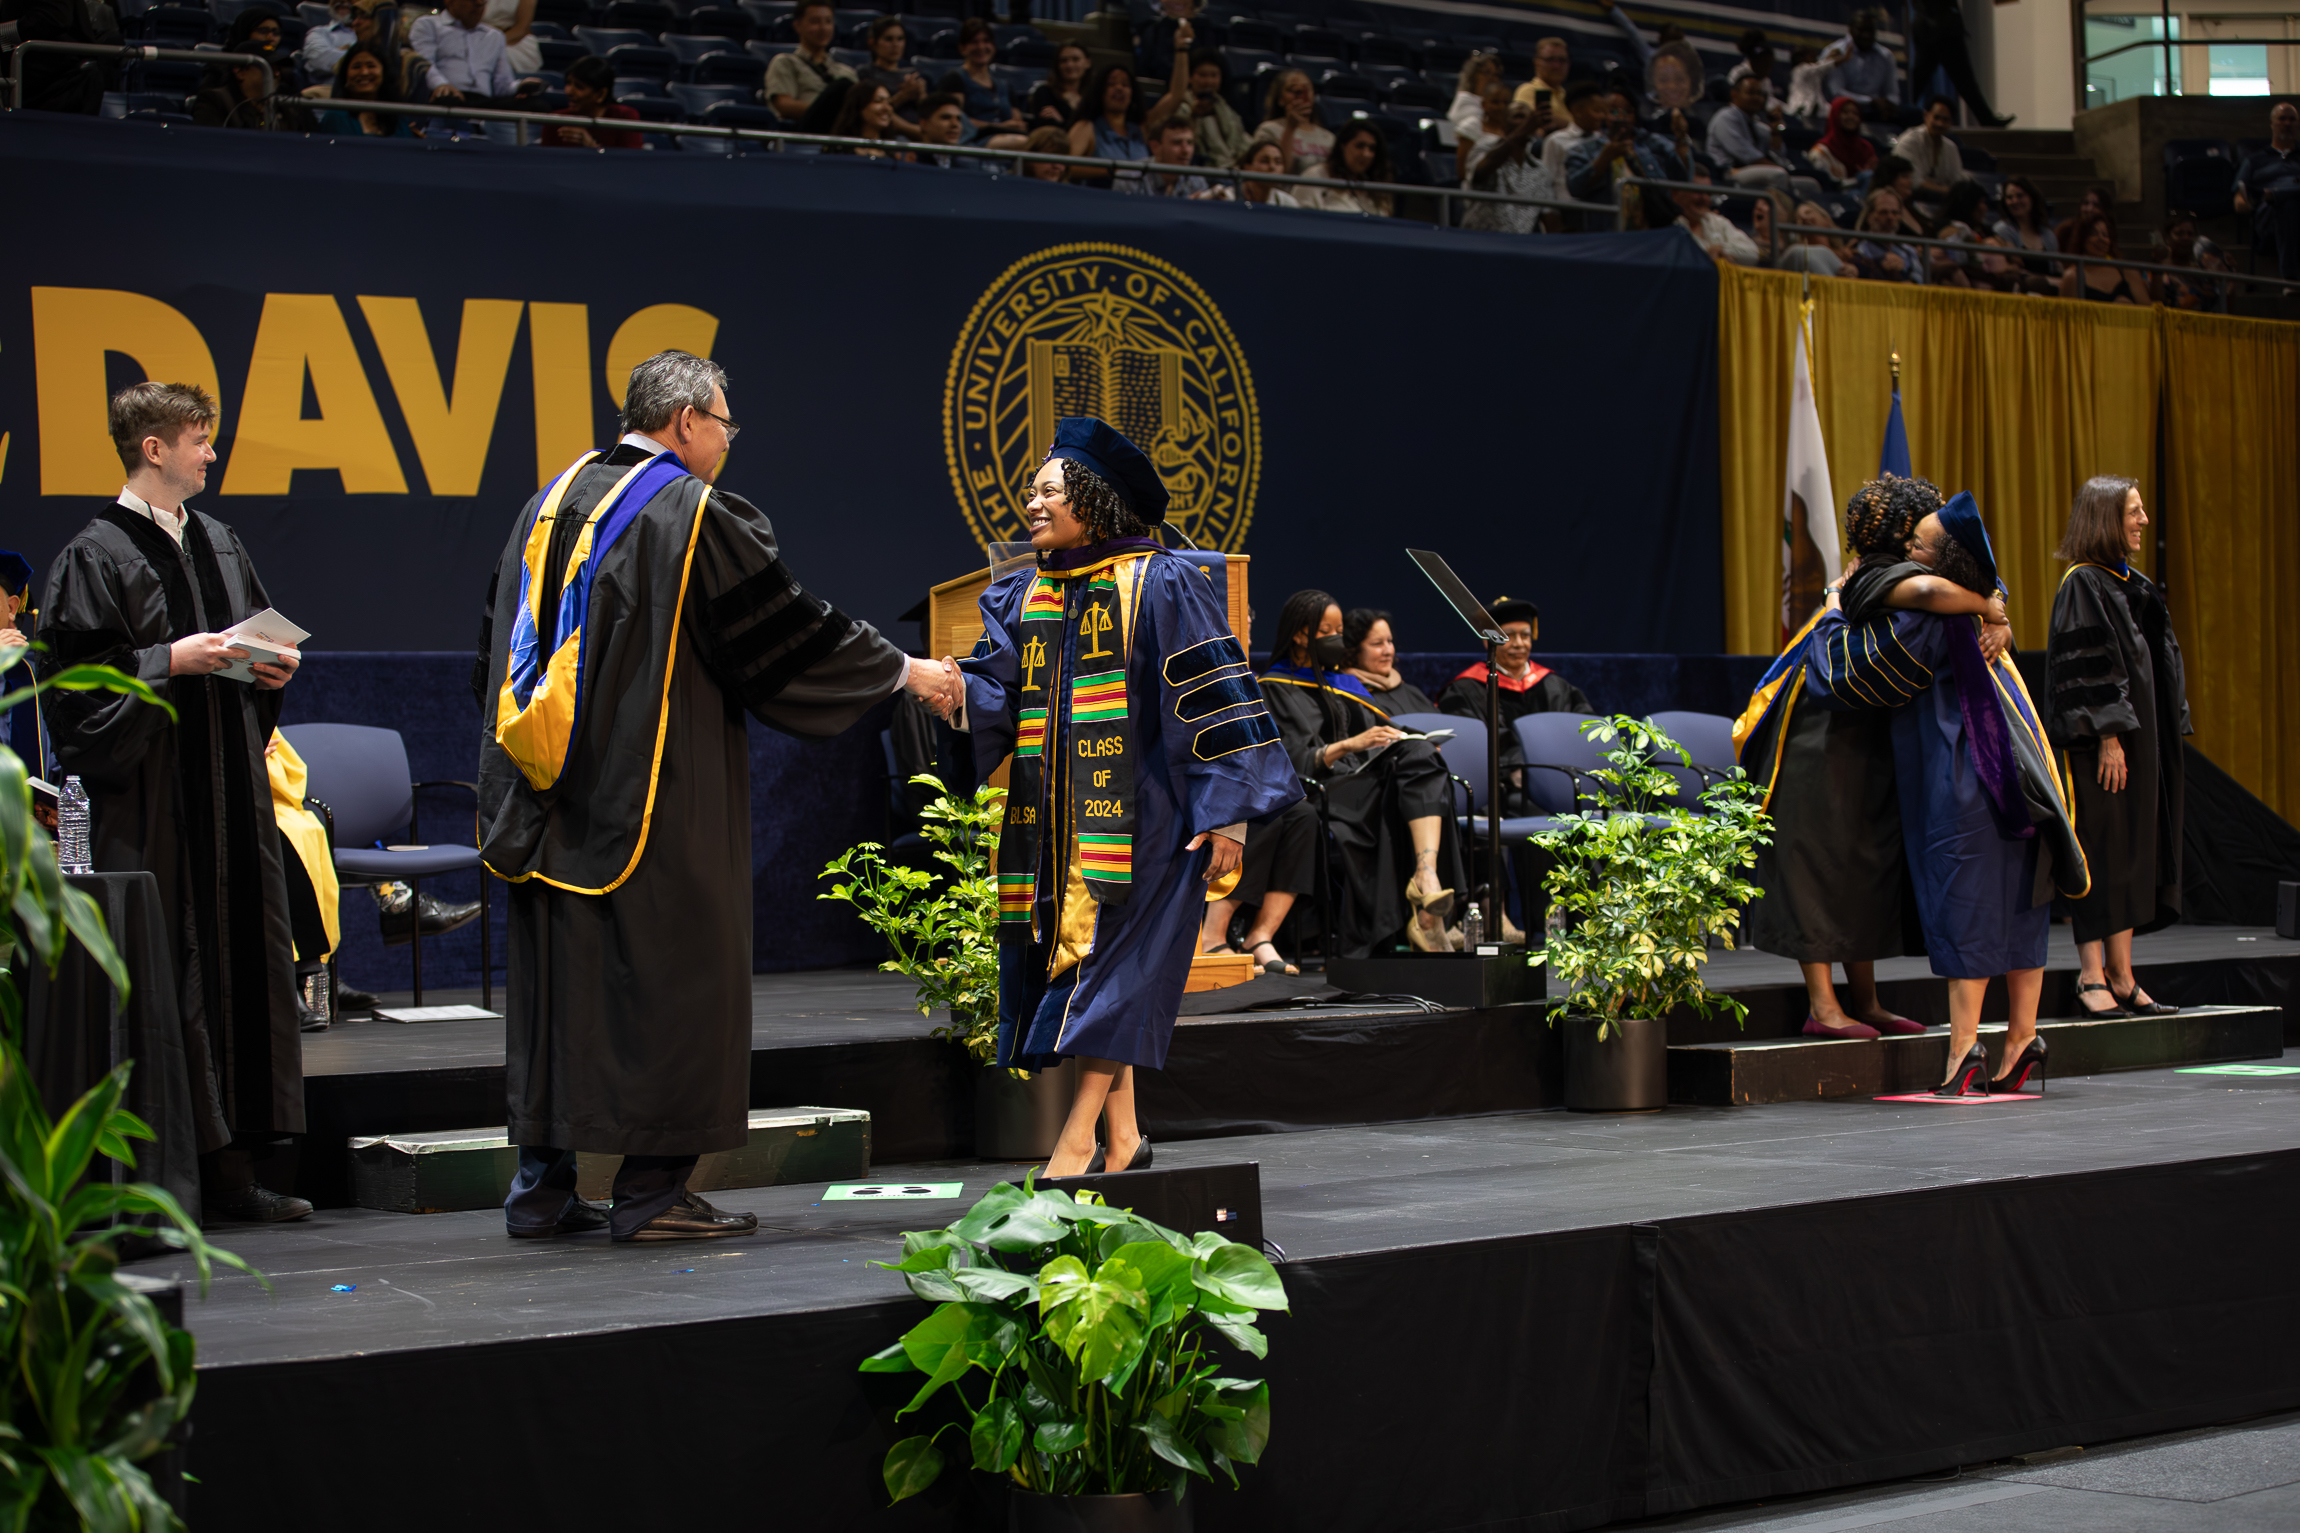 A graduate shaking Dean Kevin Johnson's hand on the stage at the UC Davis School of Law commencement ceremony.